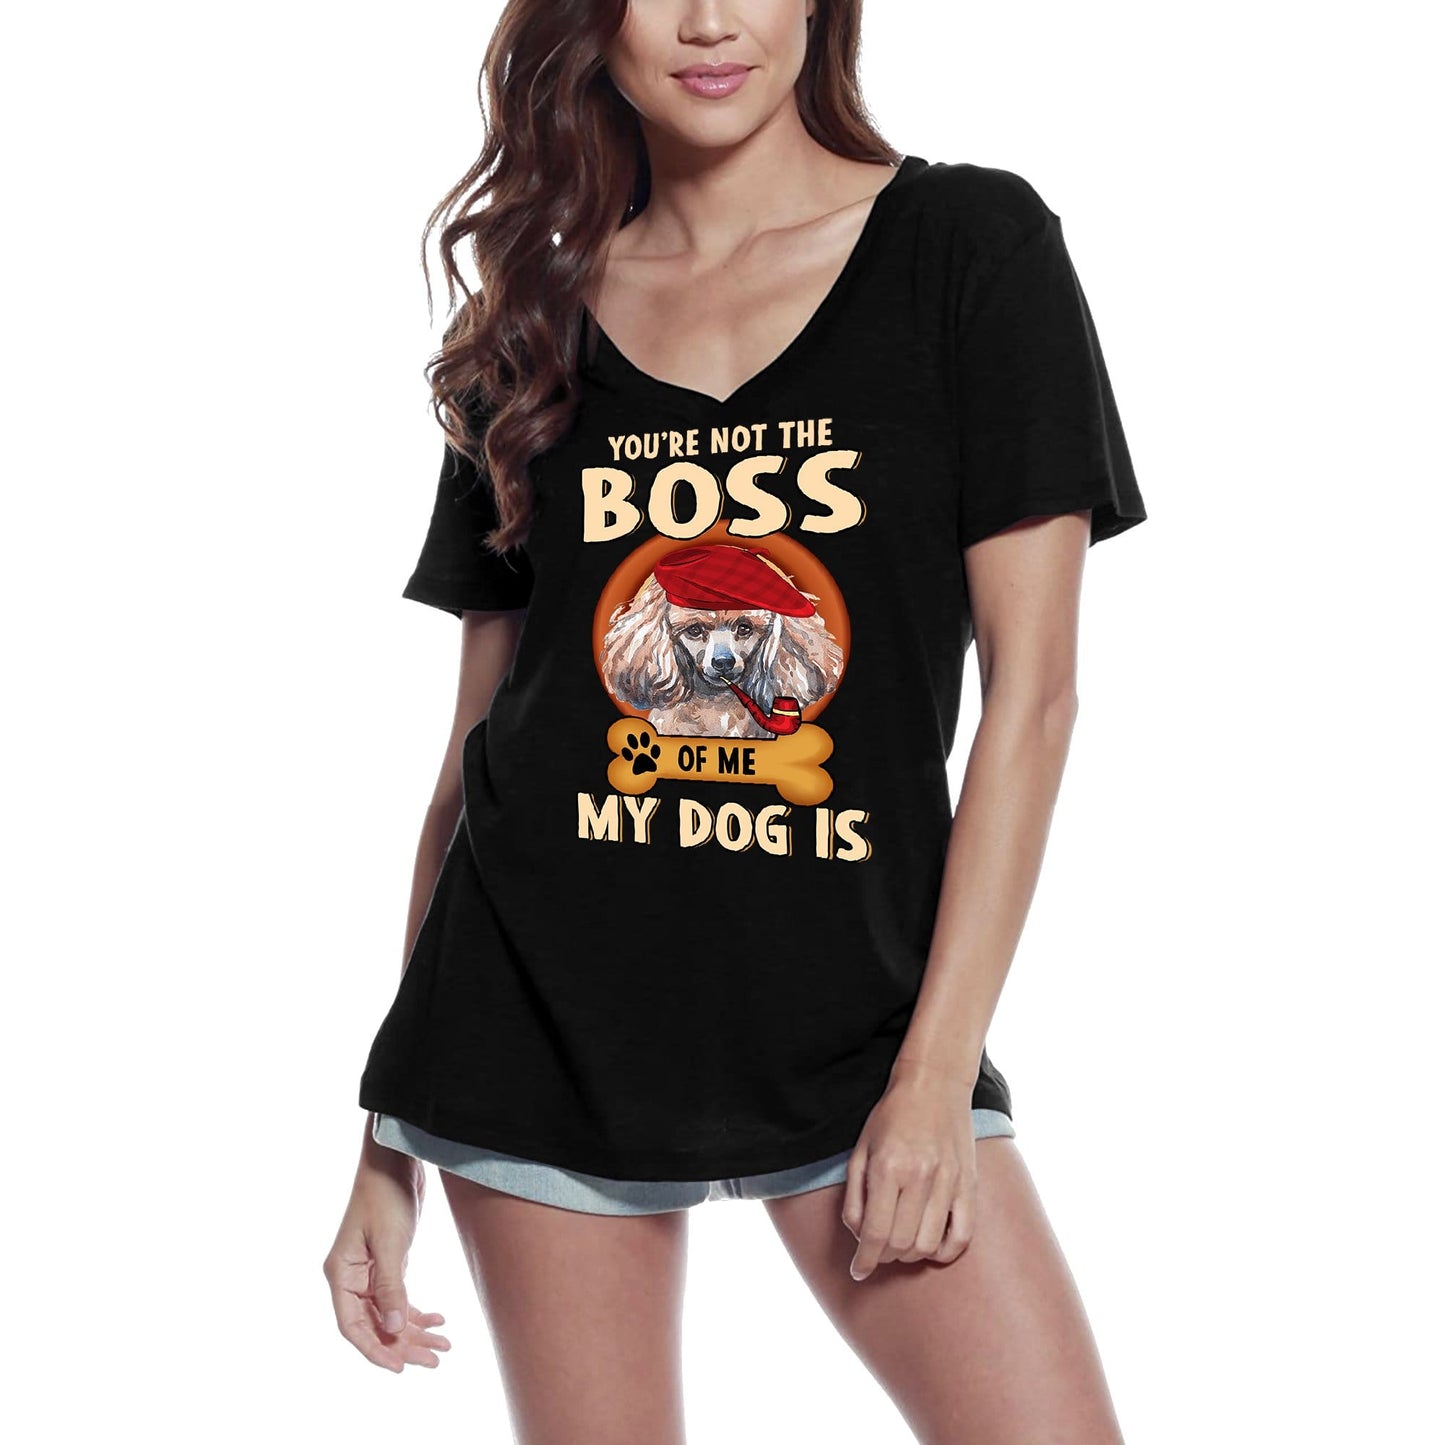 ULTRABASIC Women's T-Shirt Poodle Cute Dog Lover - Short Sleeve Tee Shirt Quote Tops